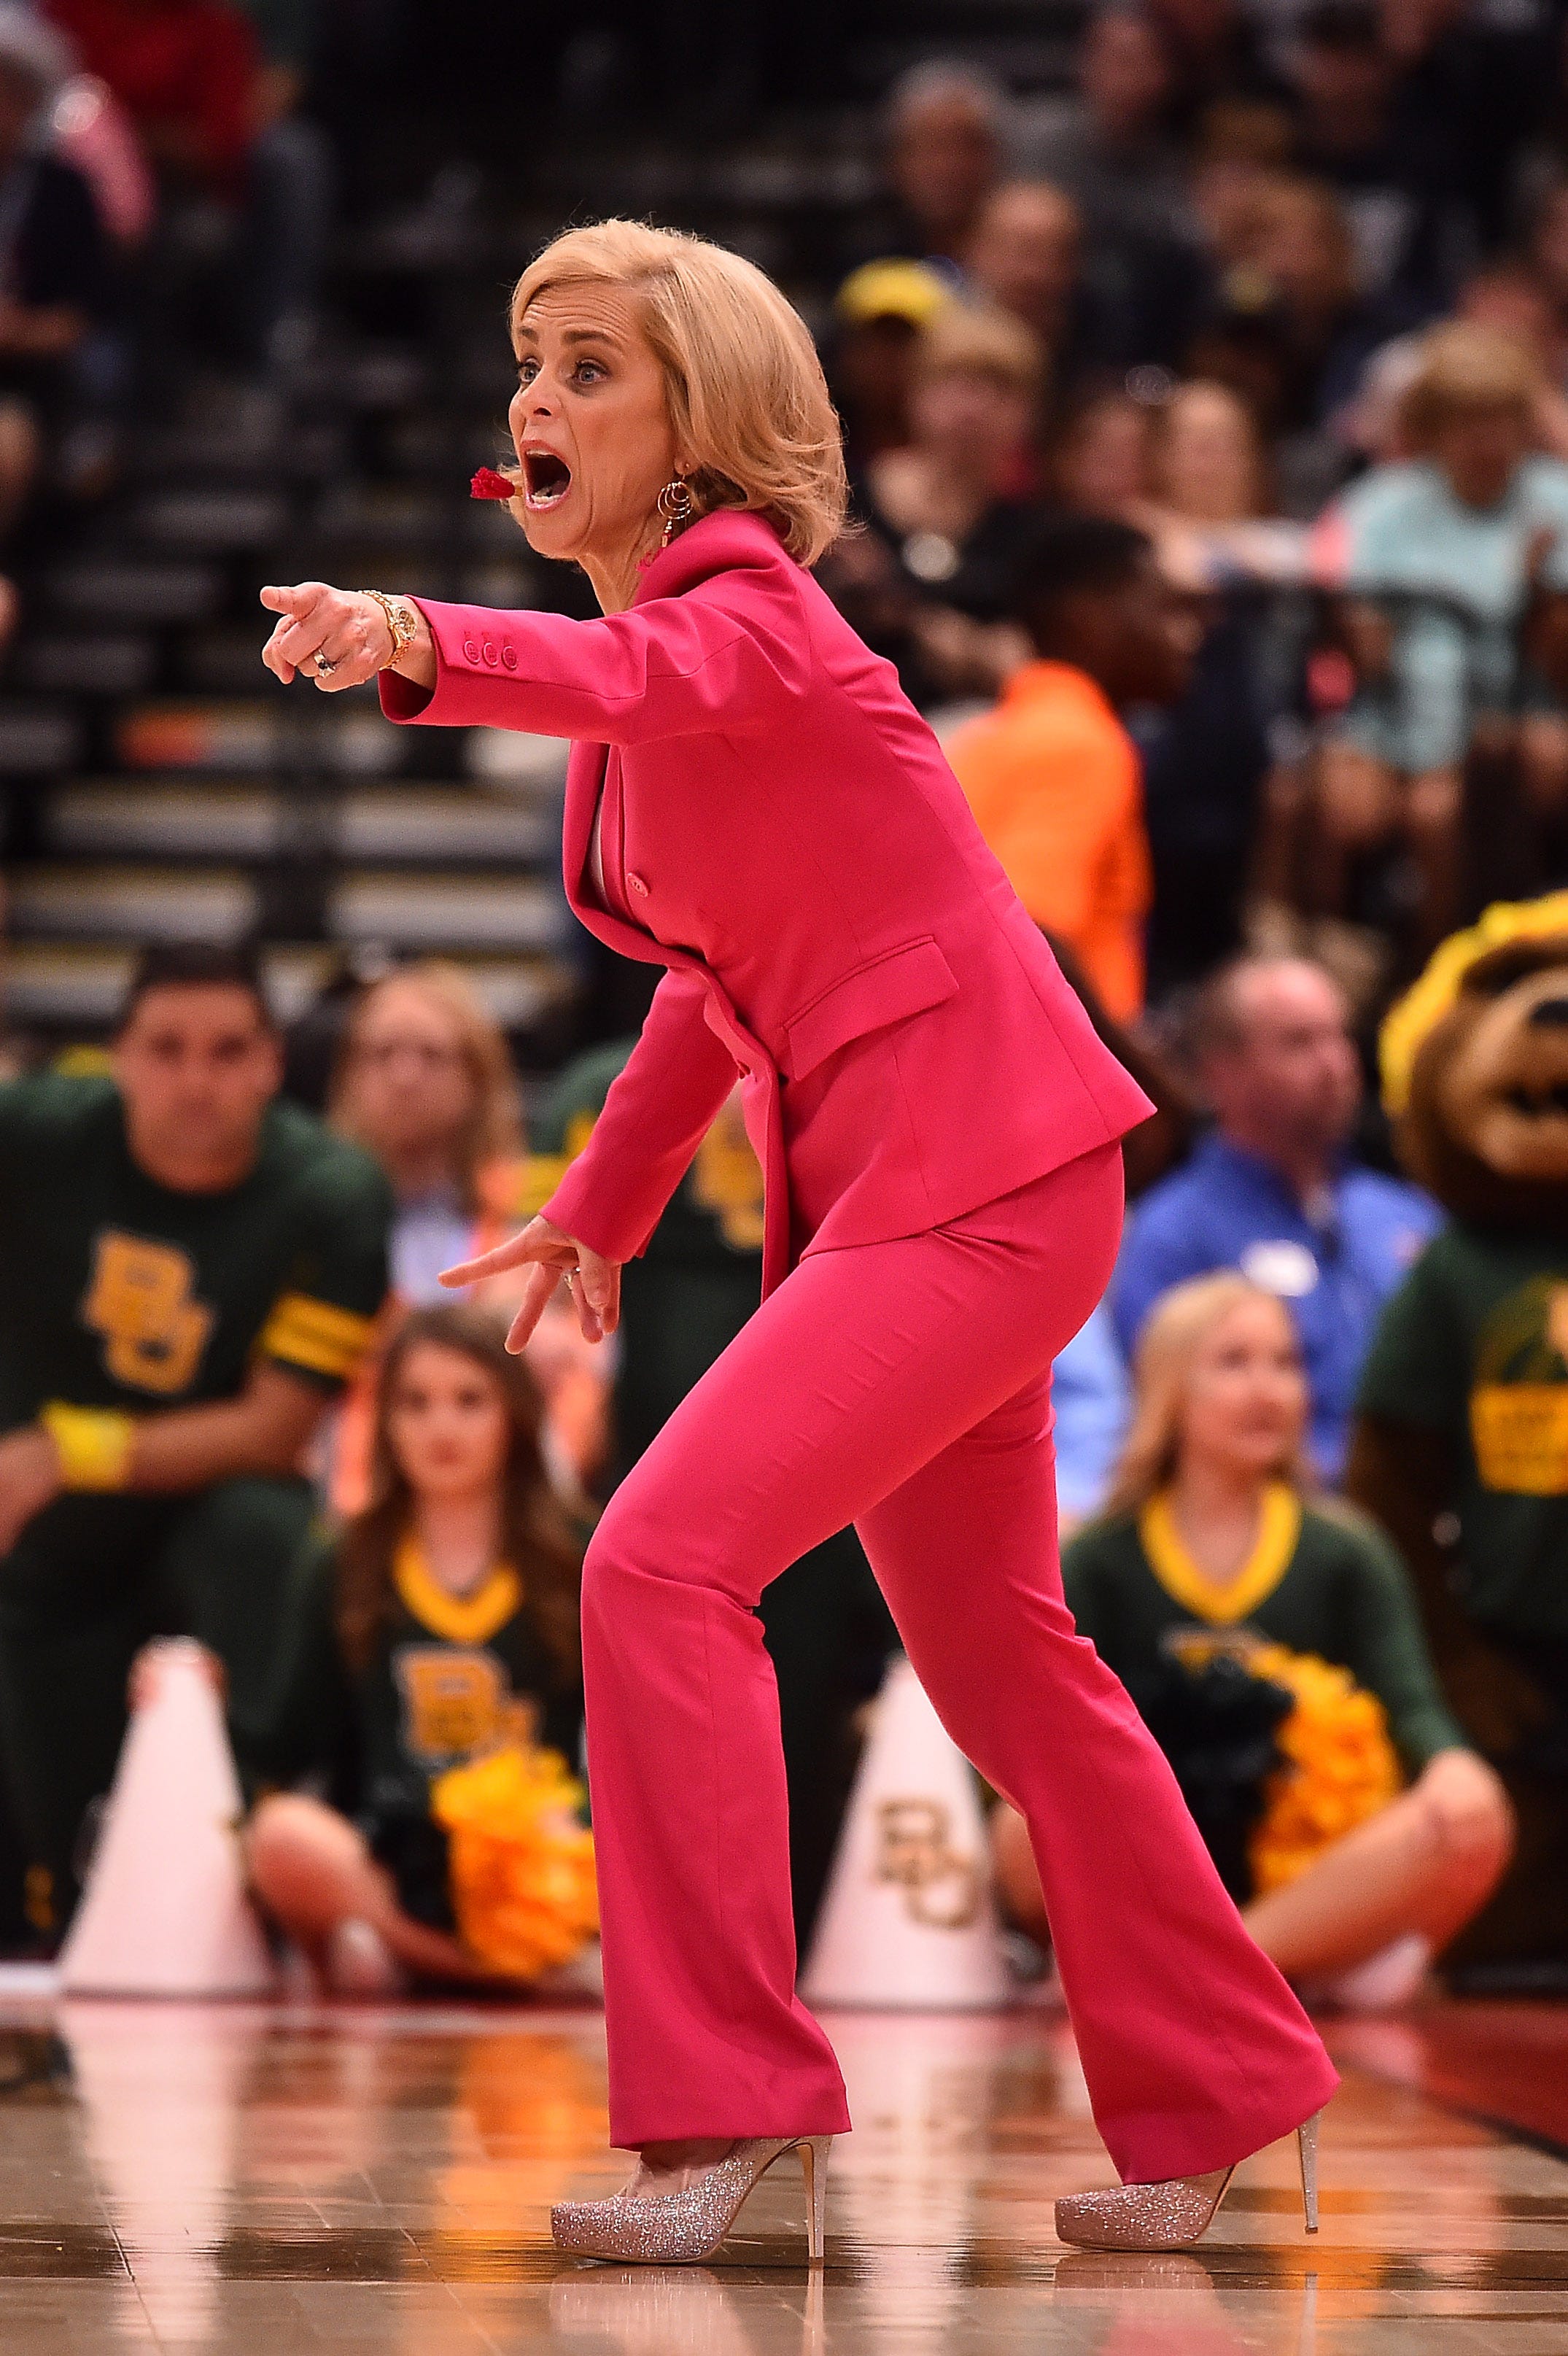 Baylor's Mulkey gets emotional about Naismith selection